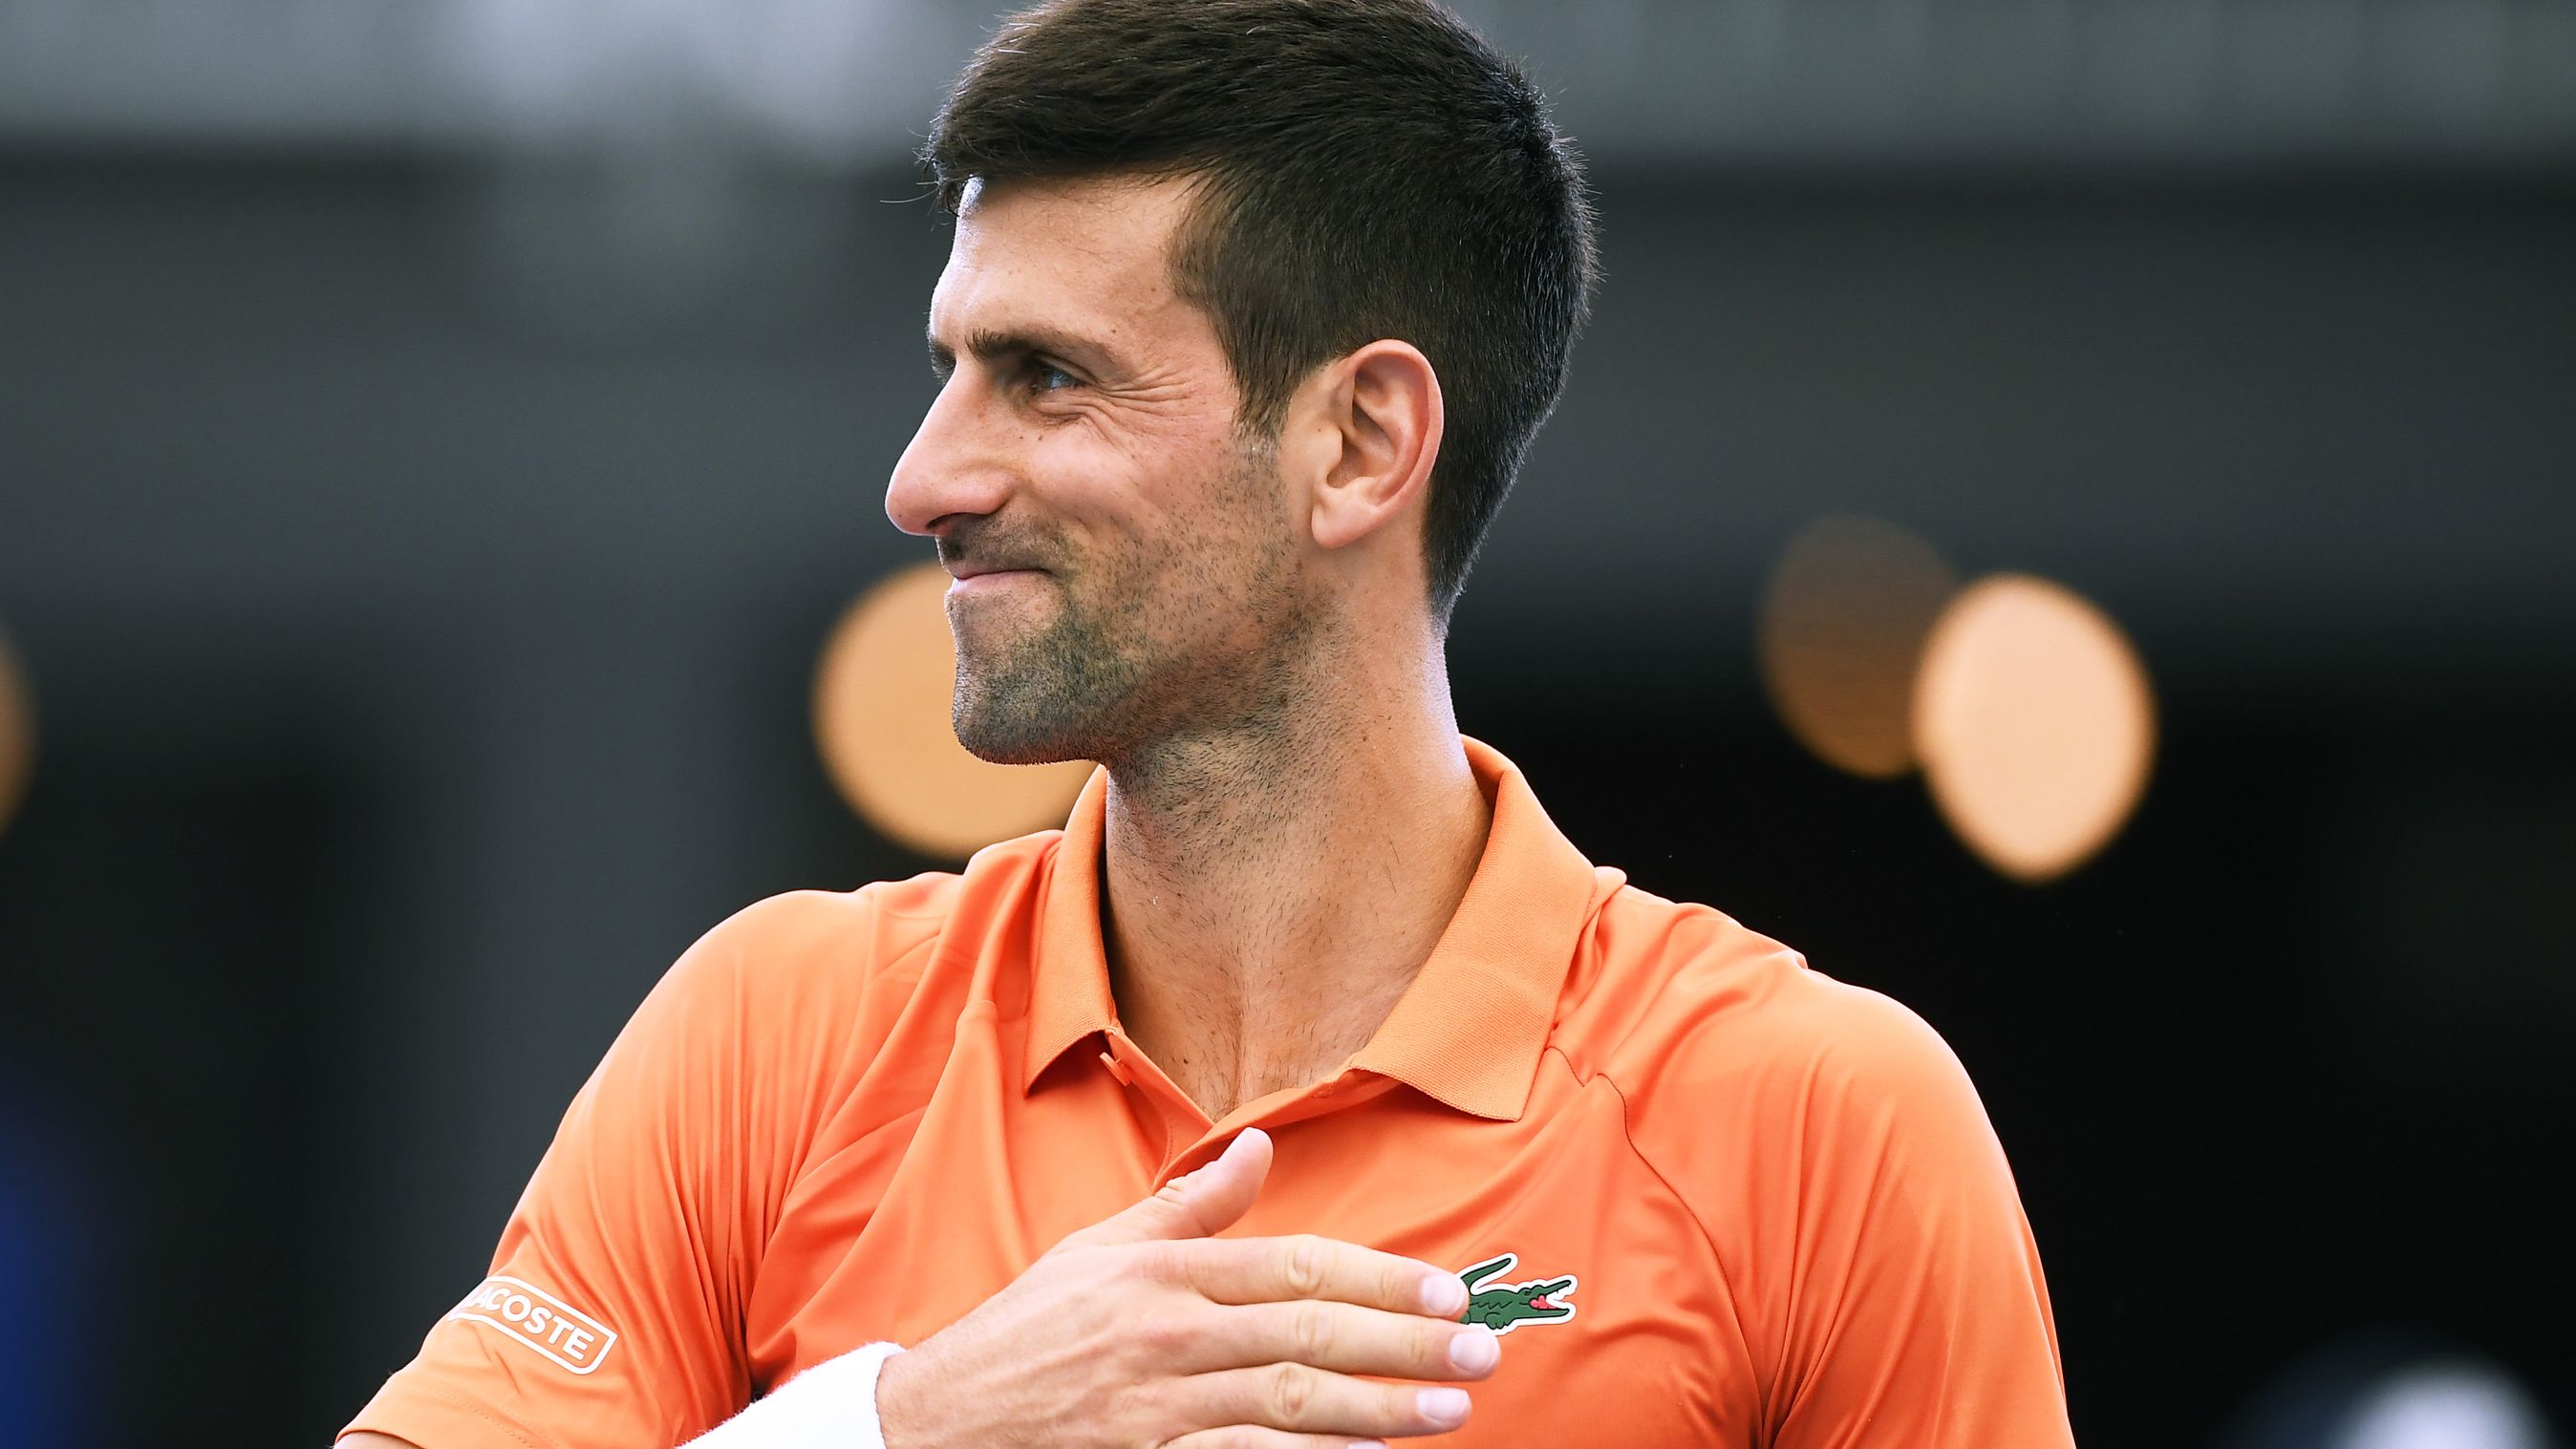 ADELAIDE, AUSTRALIA - JANUARY 03: Novak Djokovic of Serbia celebrates winning his match against Constant Lestienne of France during day three of the 2023 Adelaide International at Memorial Drive on January 03, 2023 in Adelaide, Australia. (Photo by Mark Brake/Getty Images)